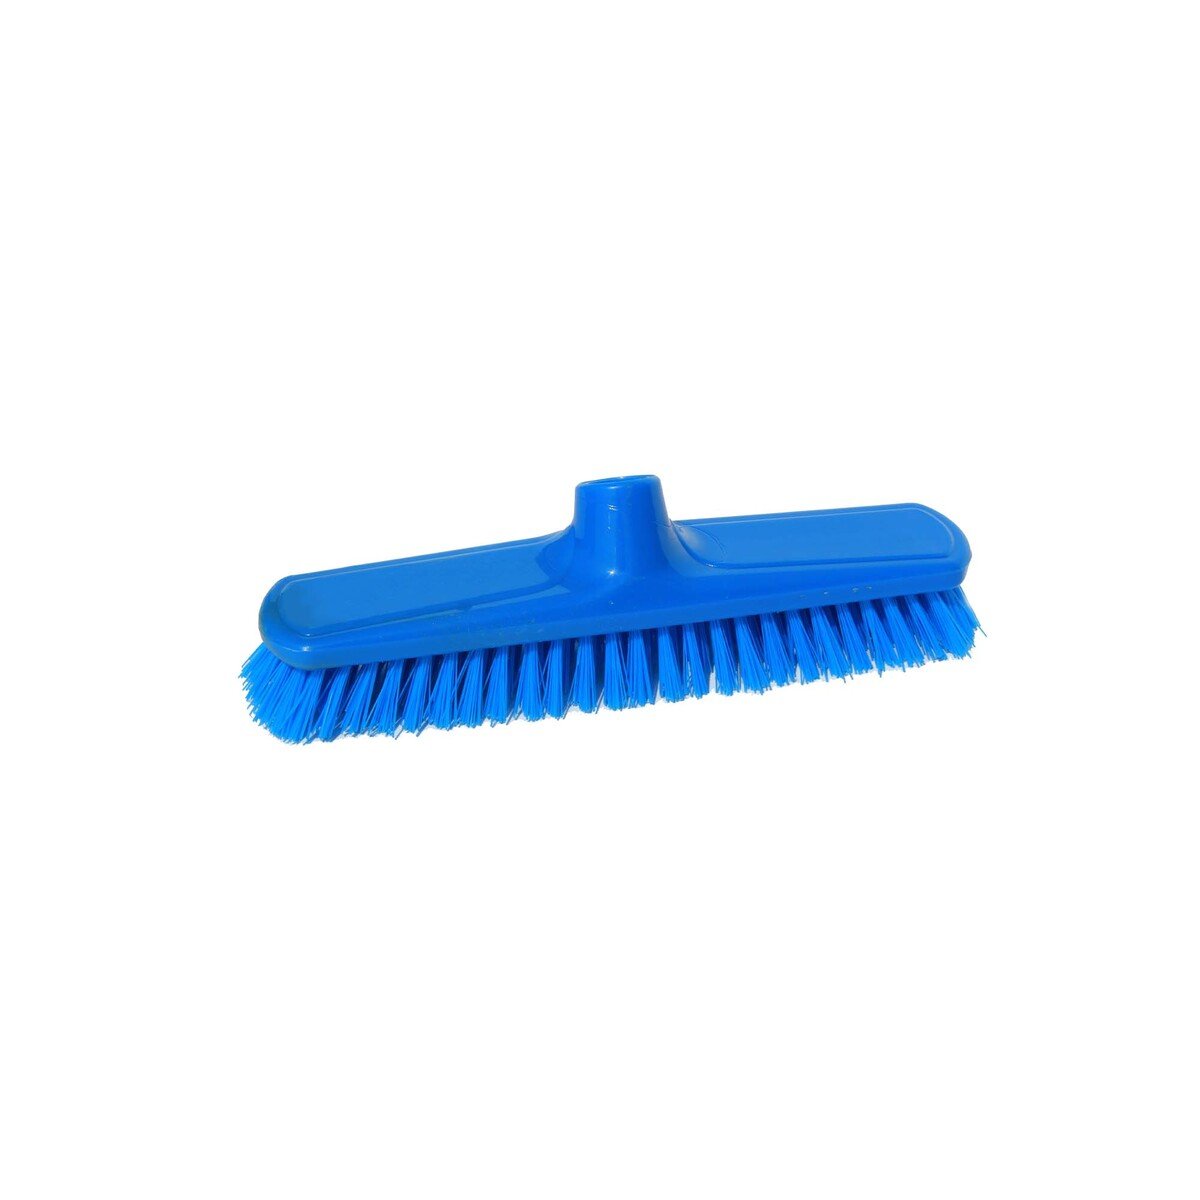 Gebi Scratchy Brush with Handle 559, 1 pc, Assorted Colors